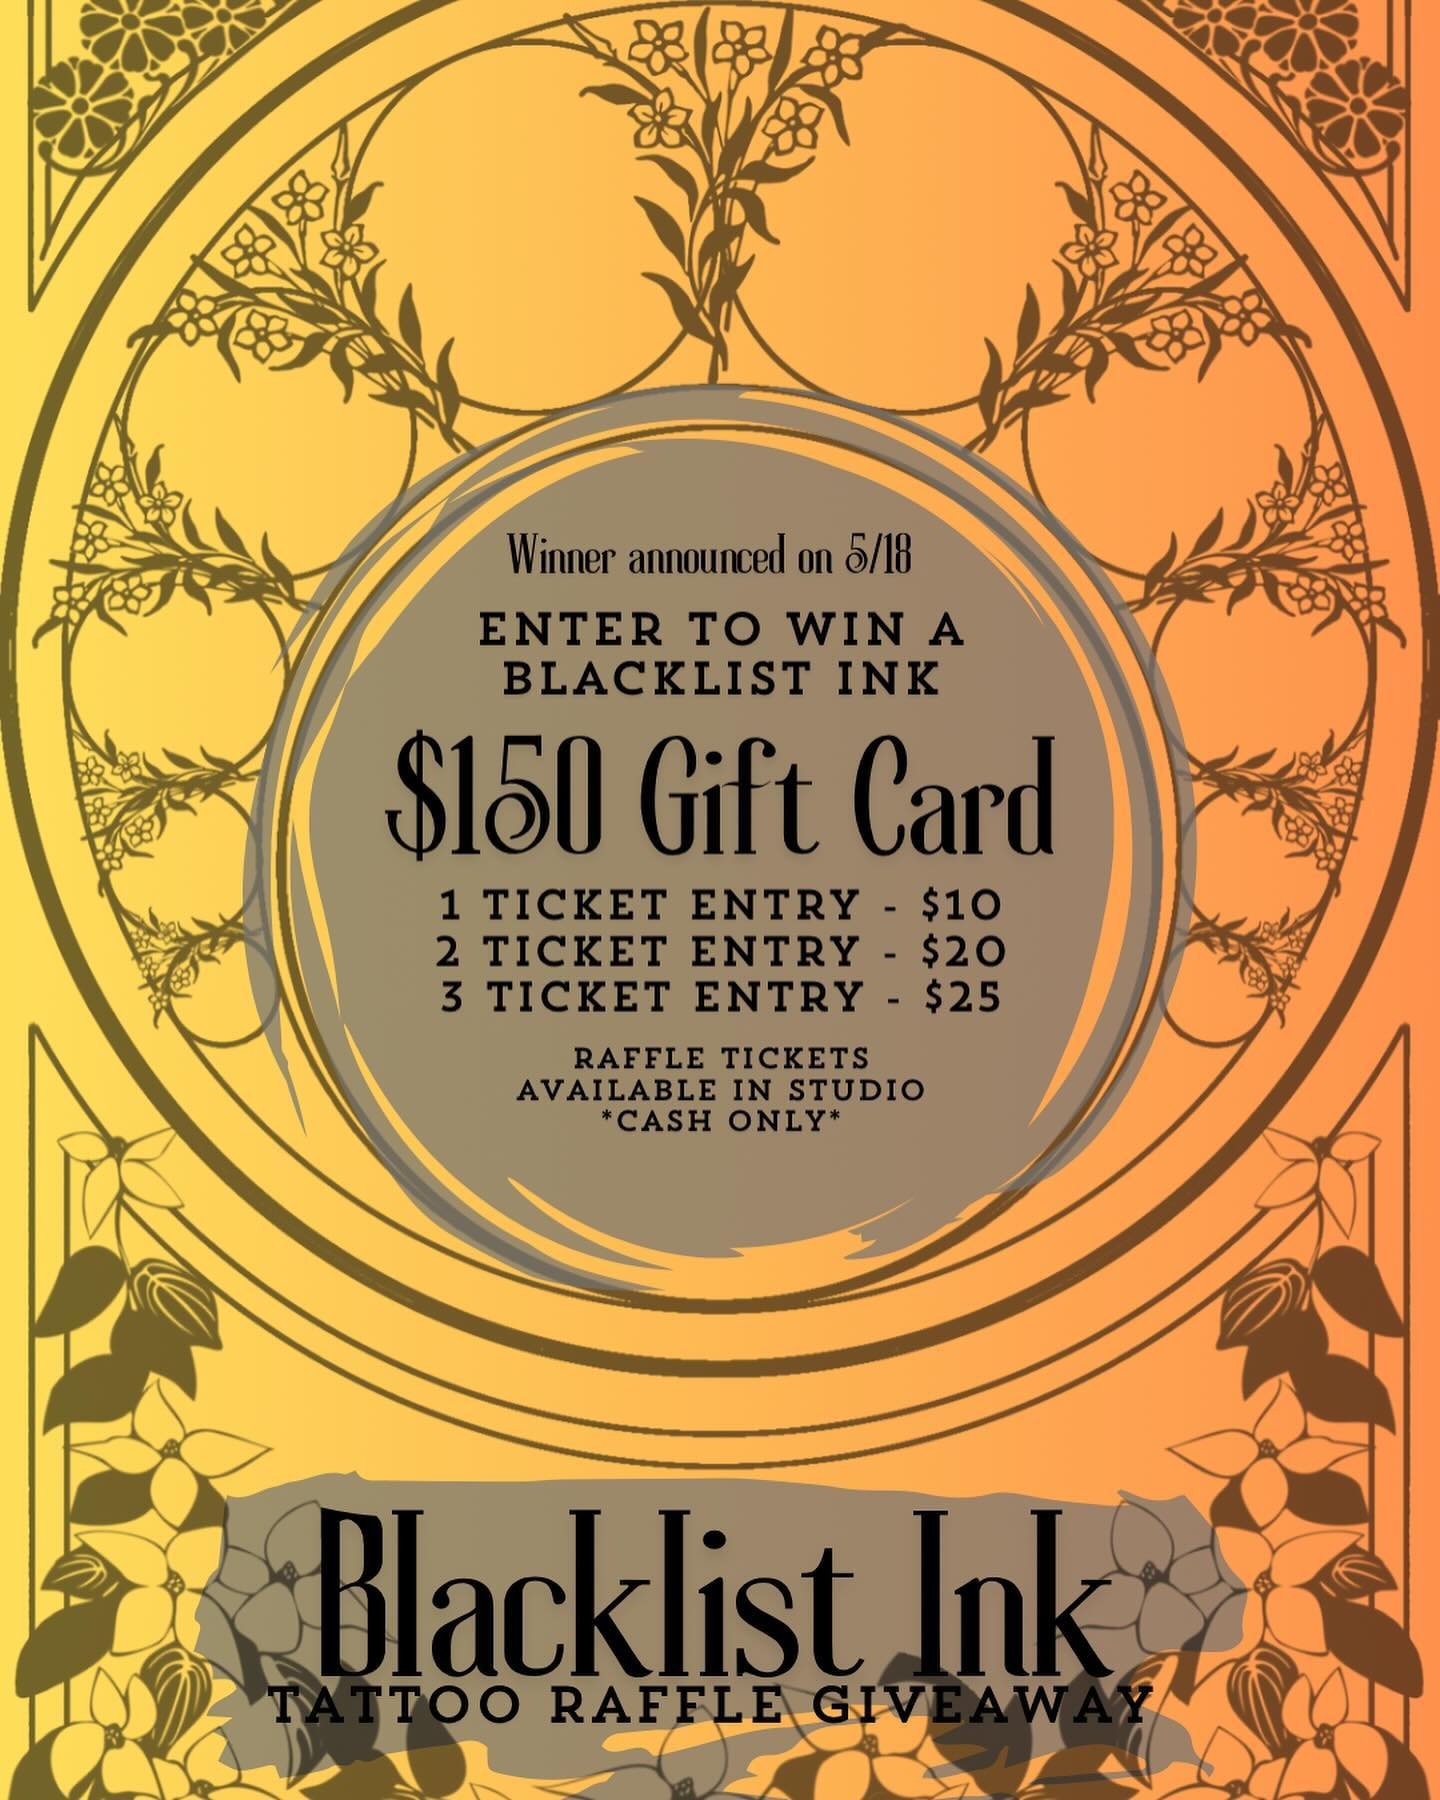 GIVEAWAY ALERT:
Blacklist Ink is excited to announce 2 different raffle giveaways happening this month!

Enter to win $150 tattoo gift card ($10 tickets)
OR
Blacklist Studio Tshirt! ($2 tickets)

Tickets can be purchased in studio during any of our n